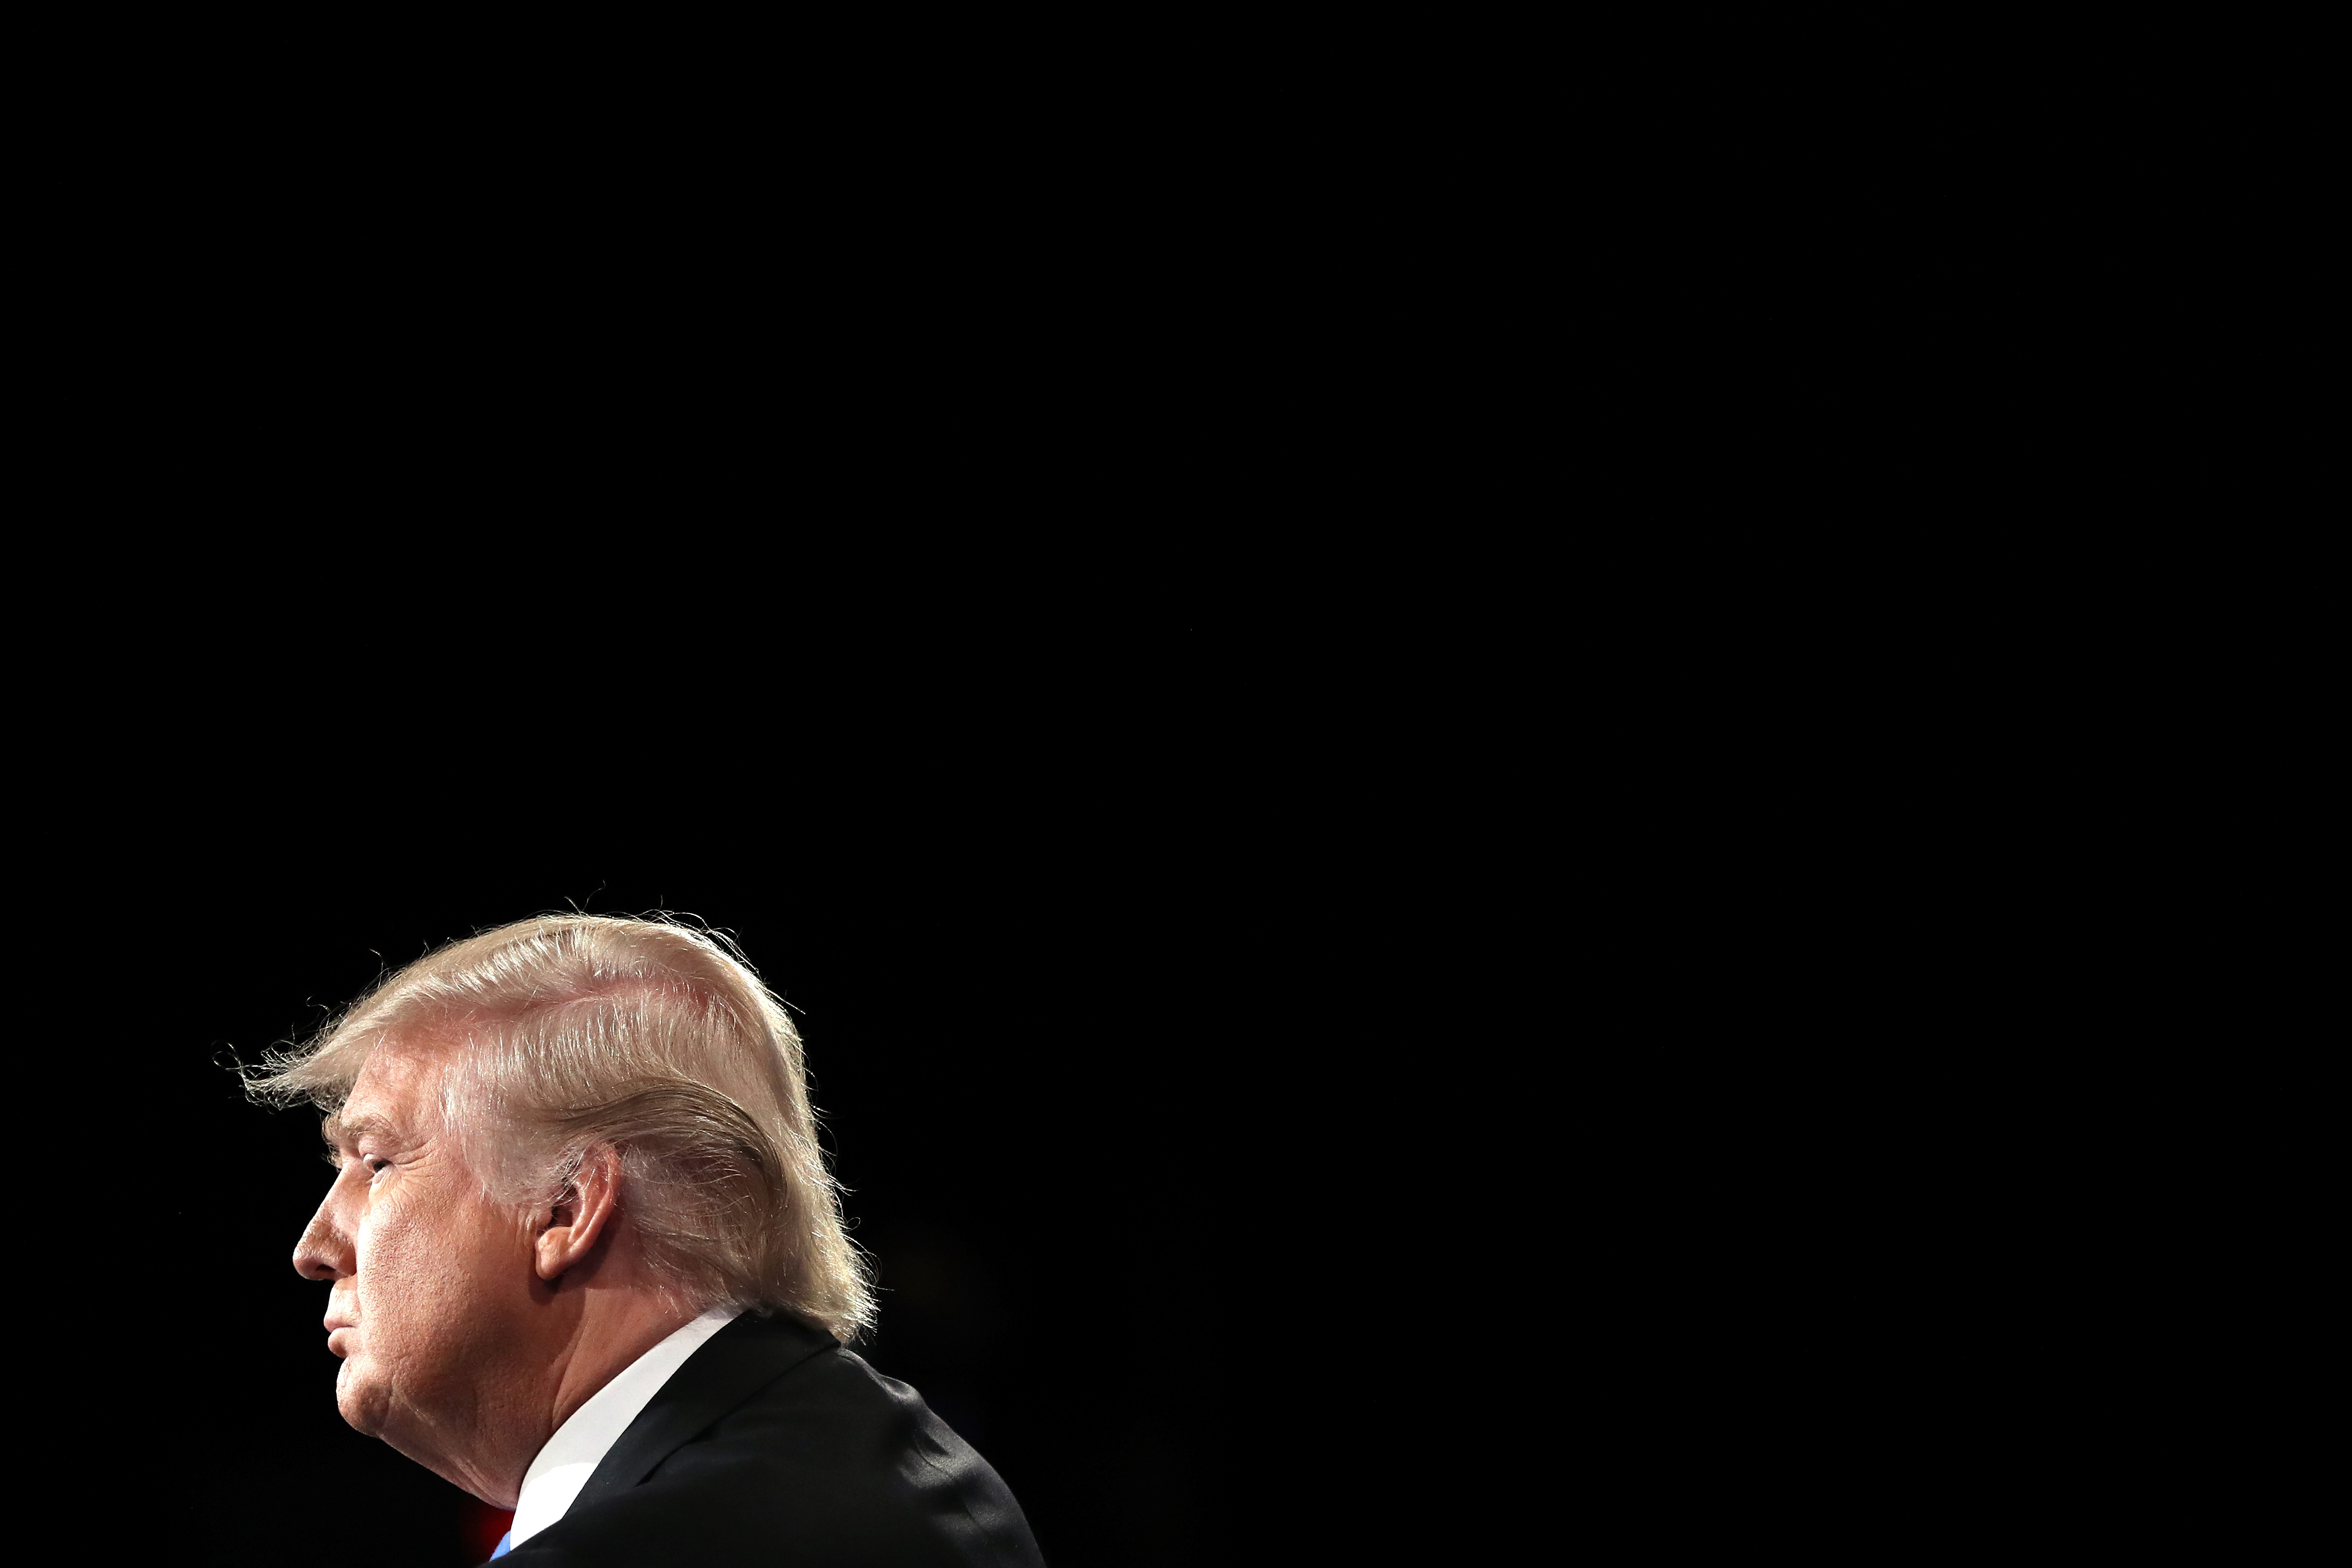 Donald Trump looks out over a crowd at a presidential debate